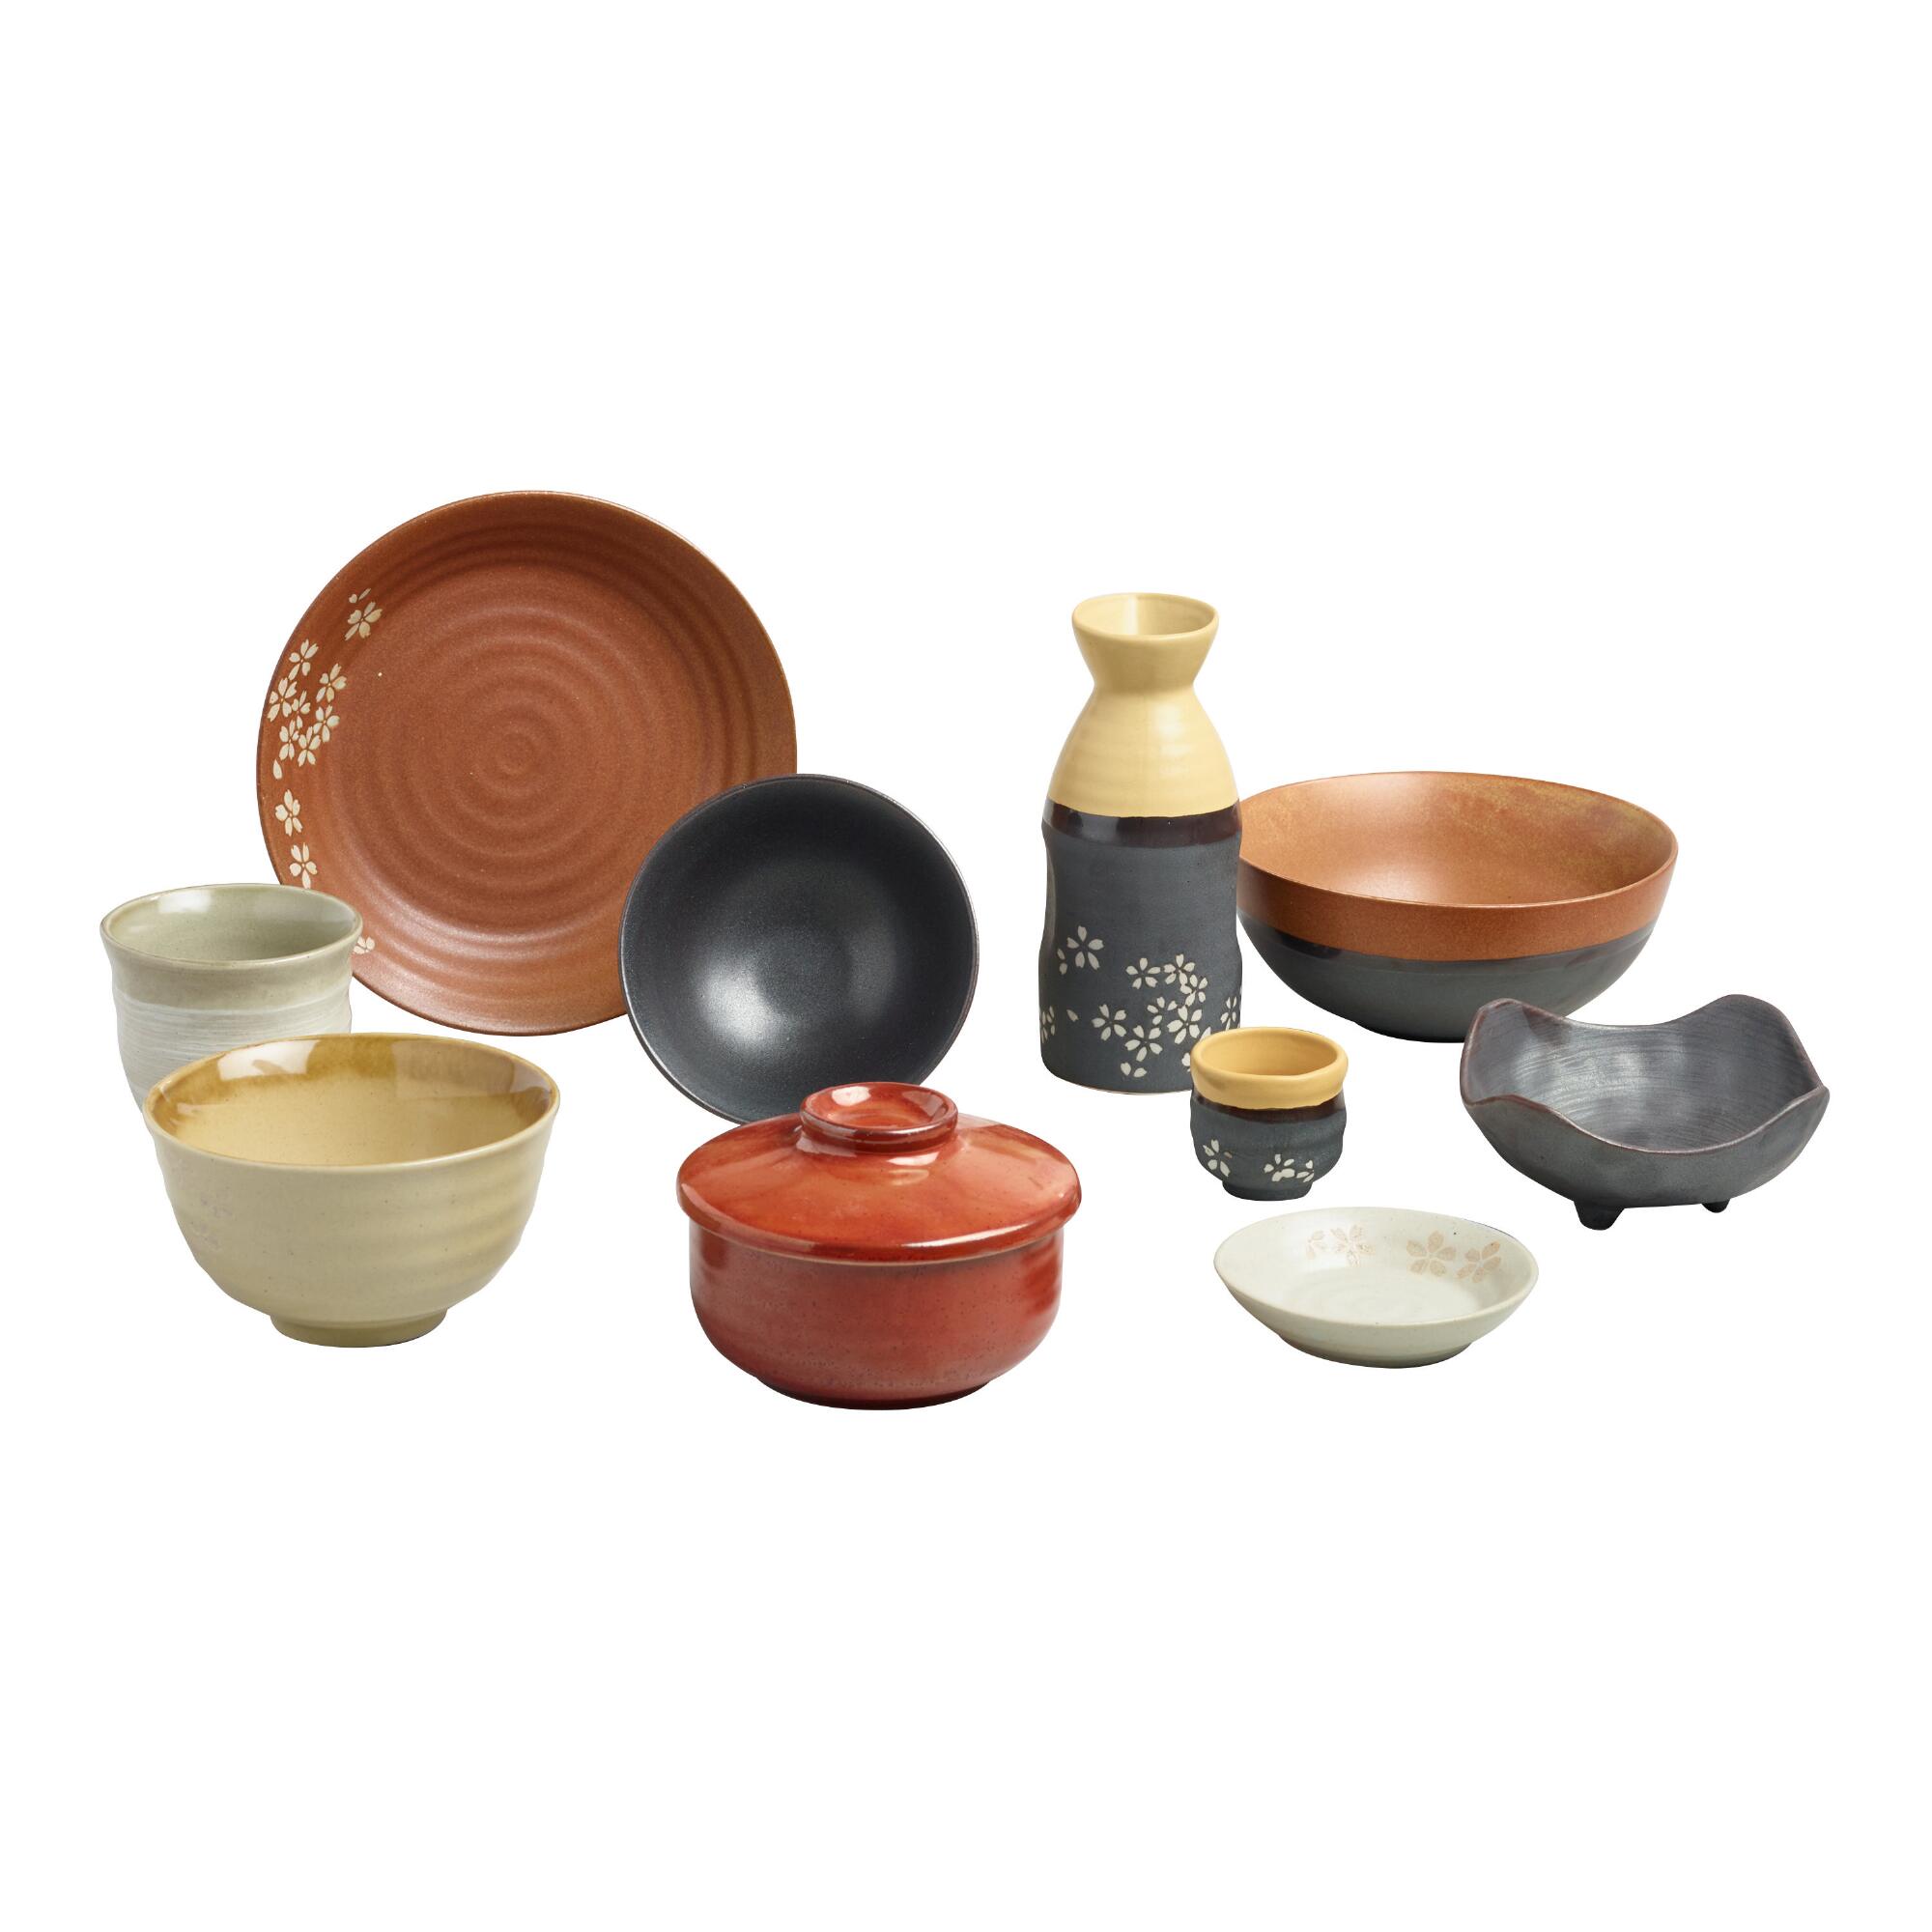 Fuji Dishware Collection by World Market